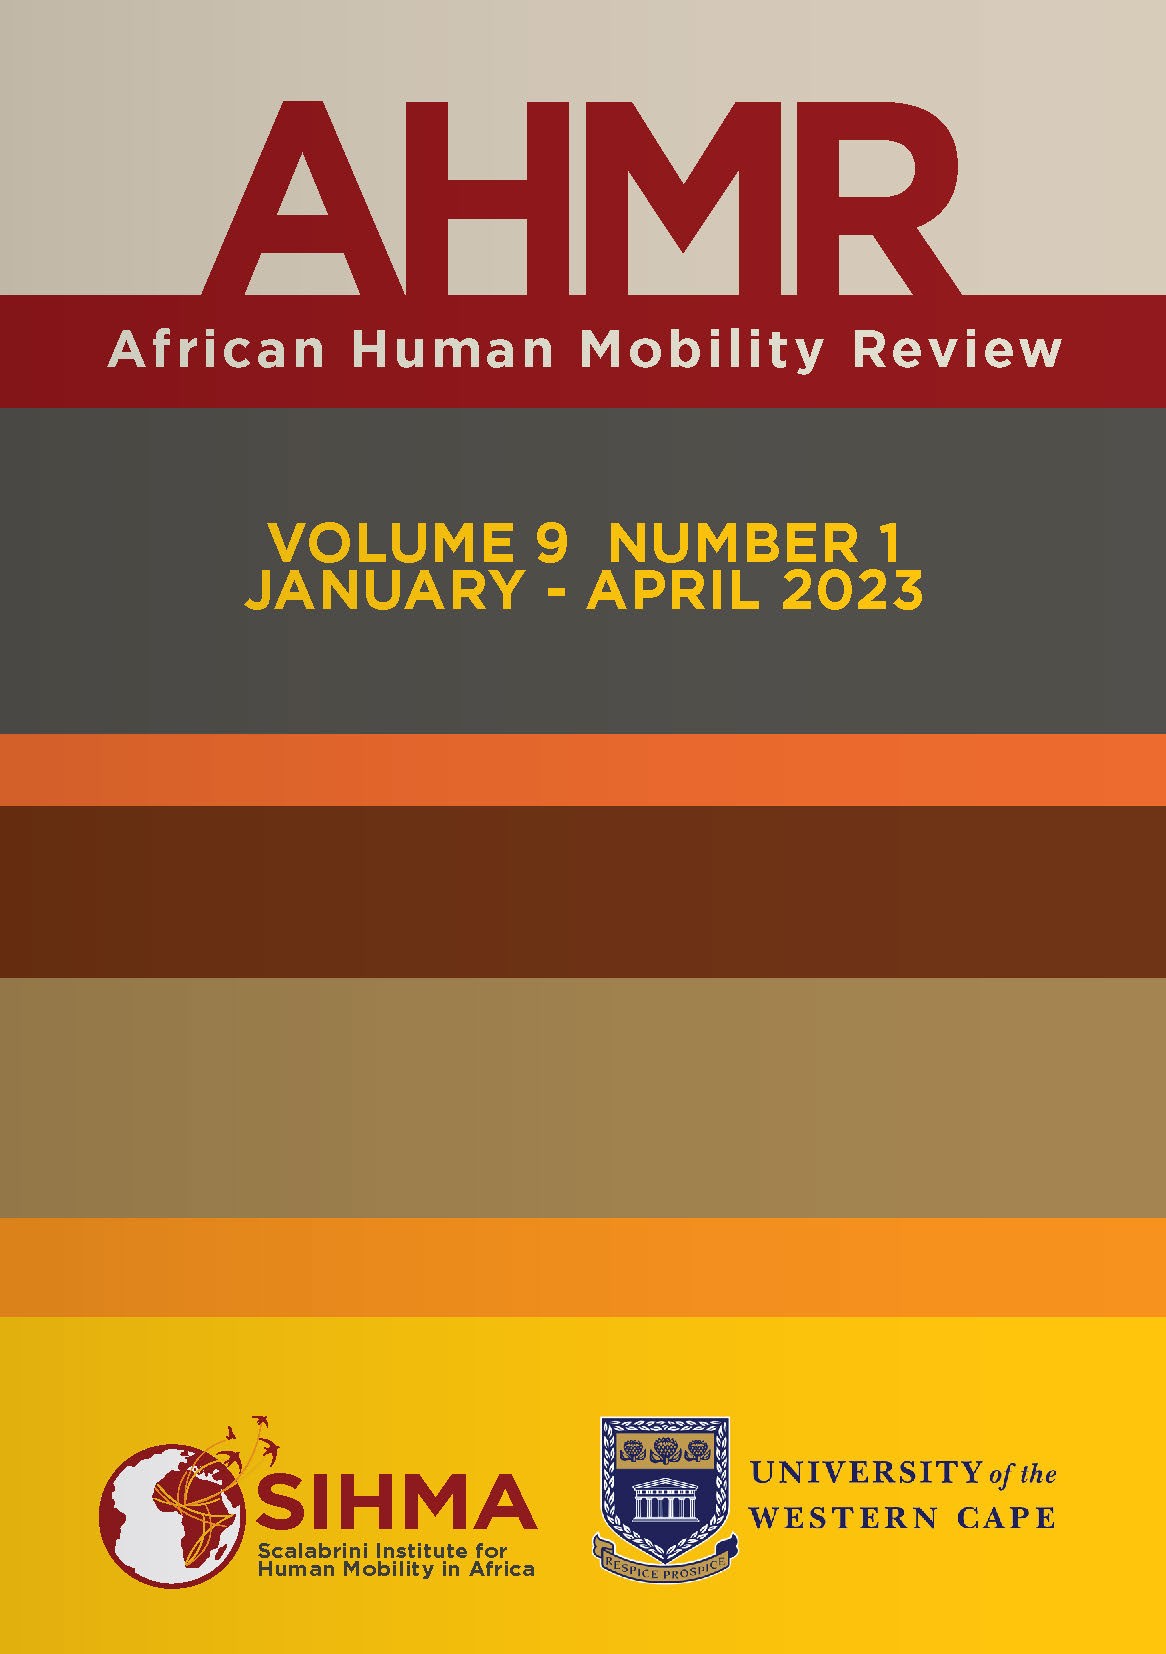 African Human Mobility Review